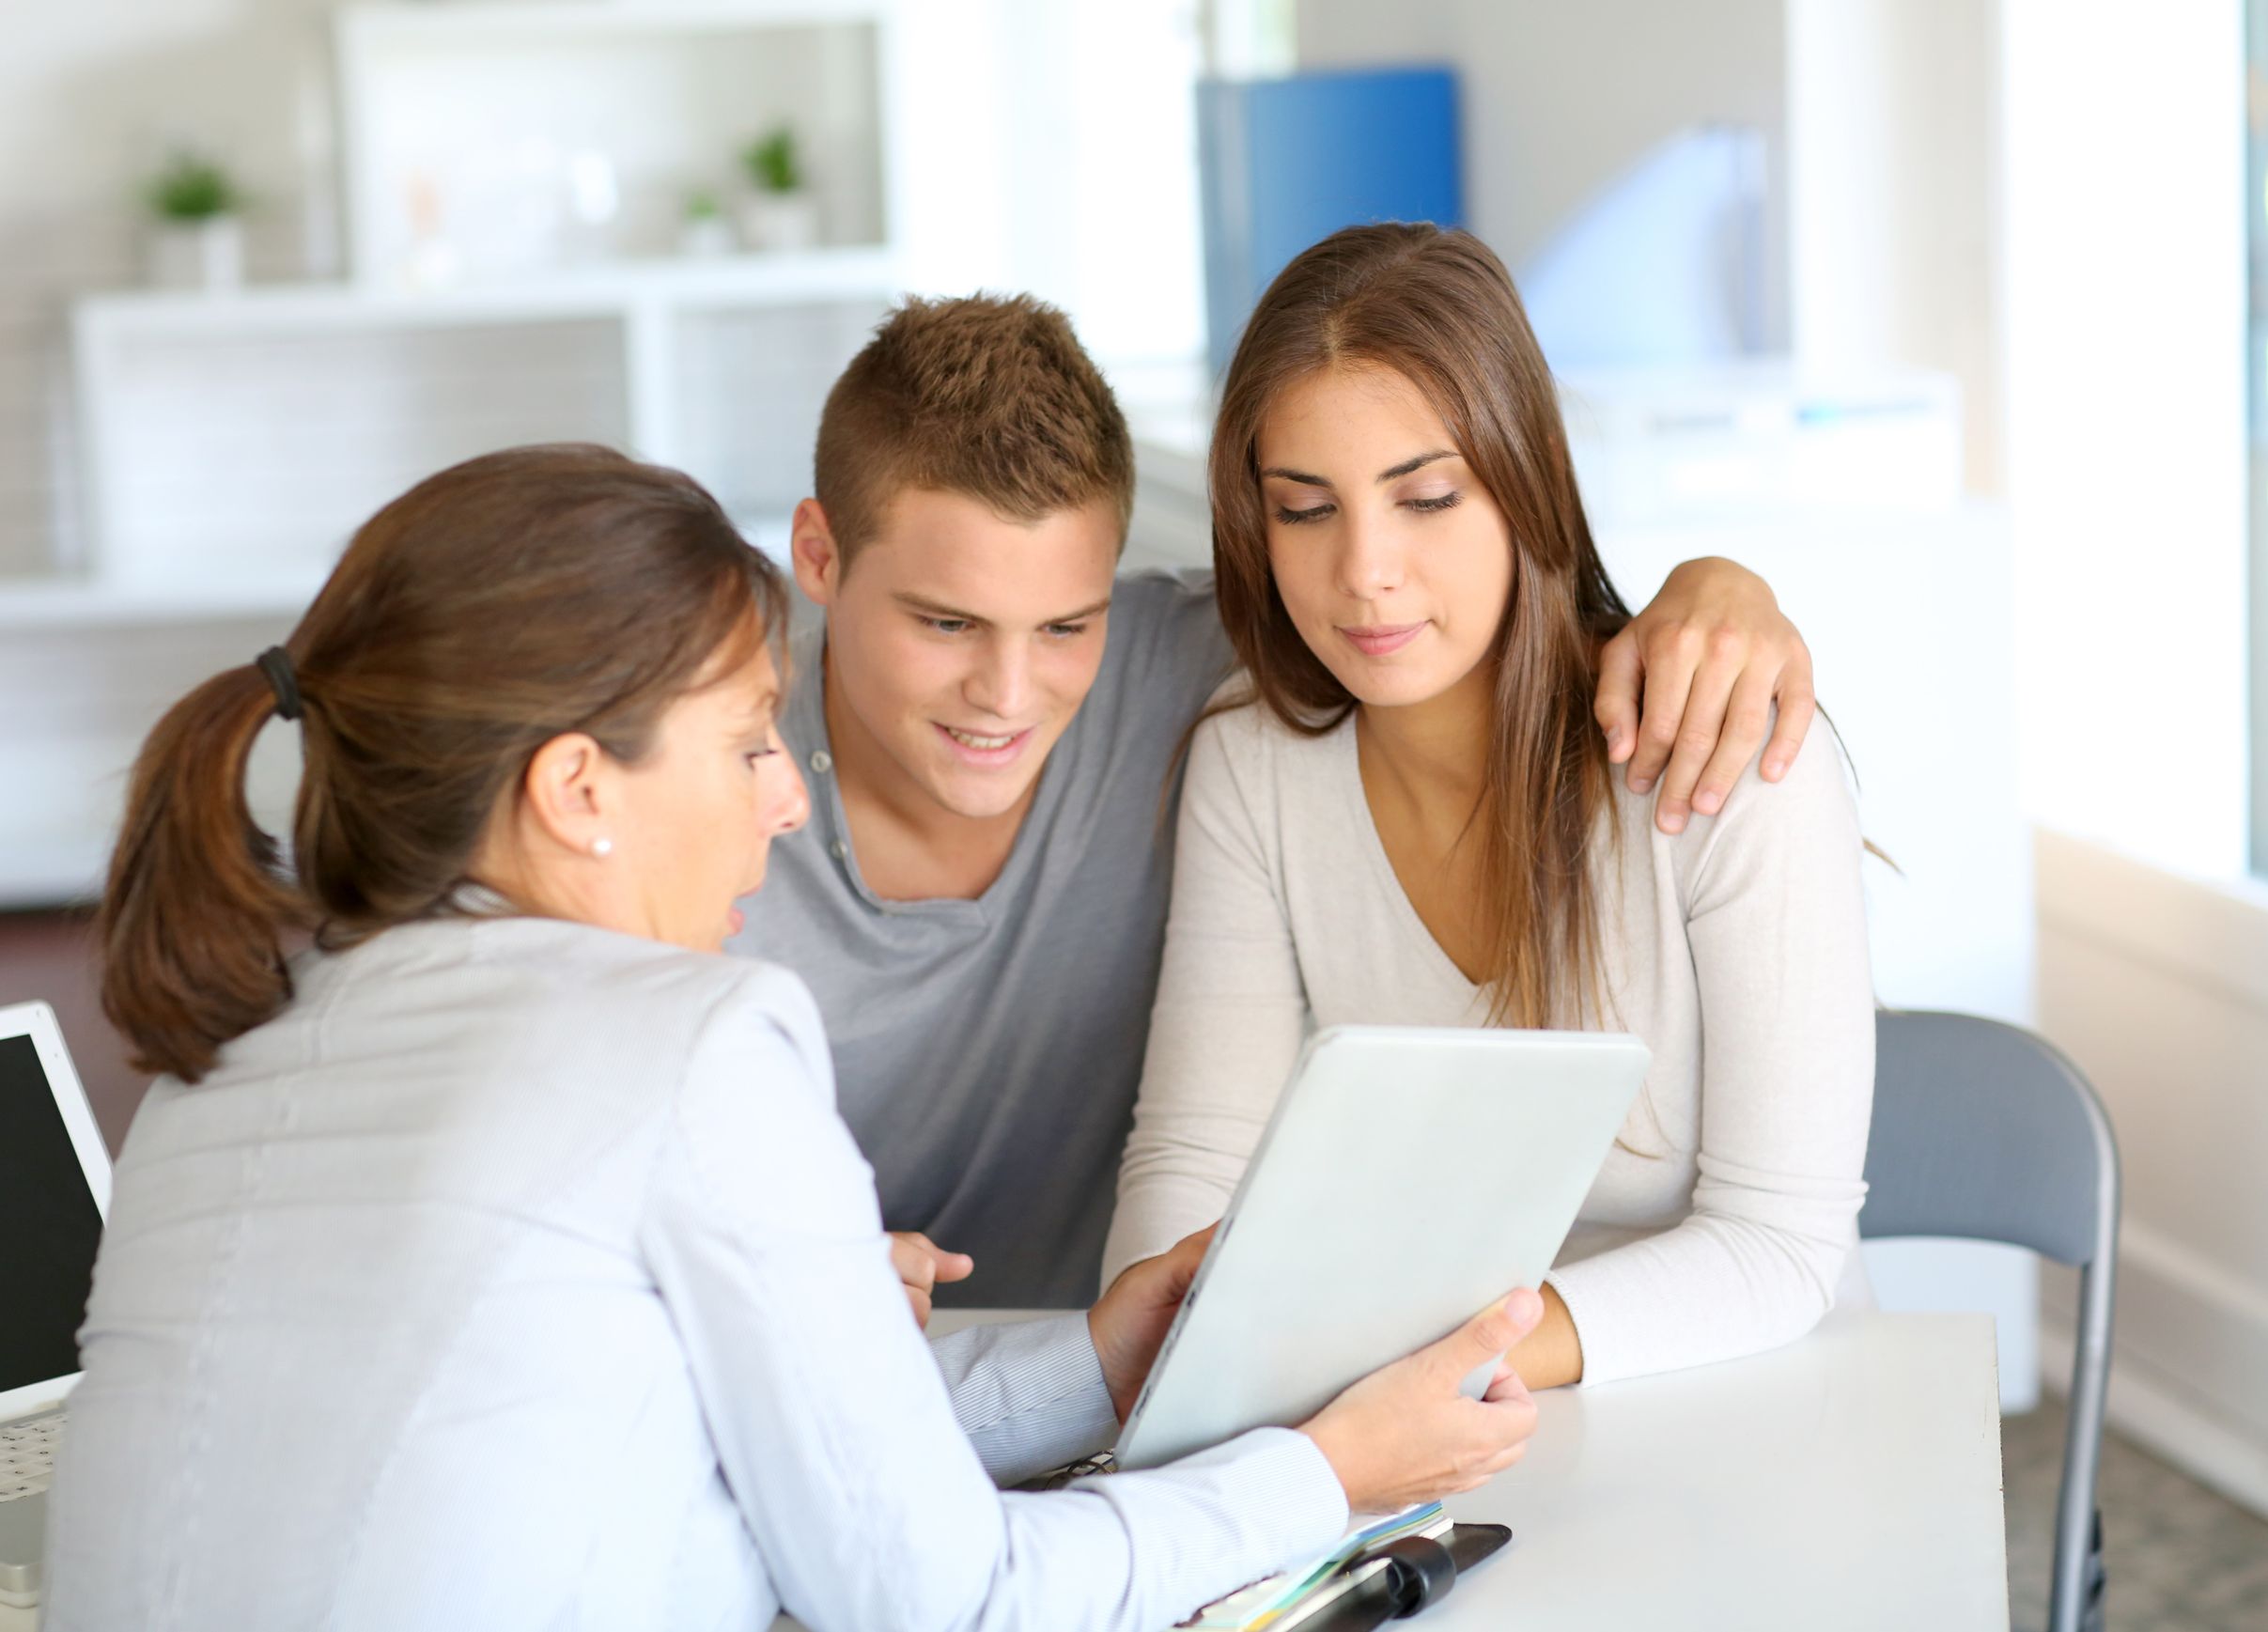 Consolidation Loans for Bad Credit in Victoria: Avoid These 5 Pitfalls!